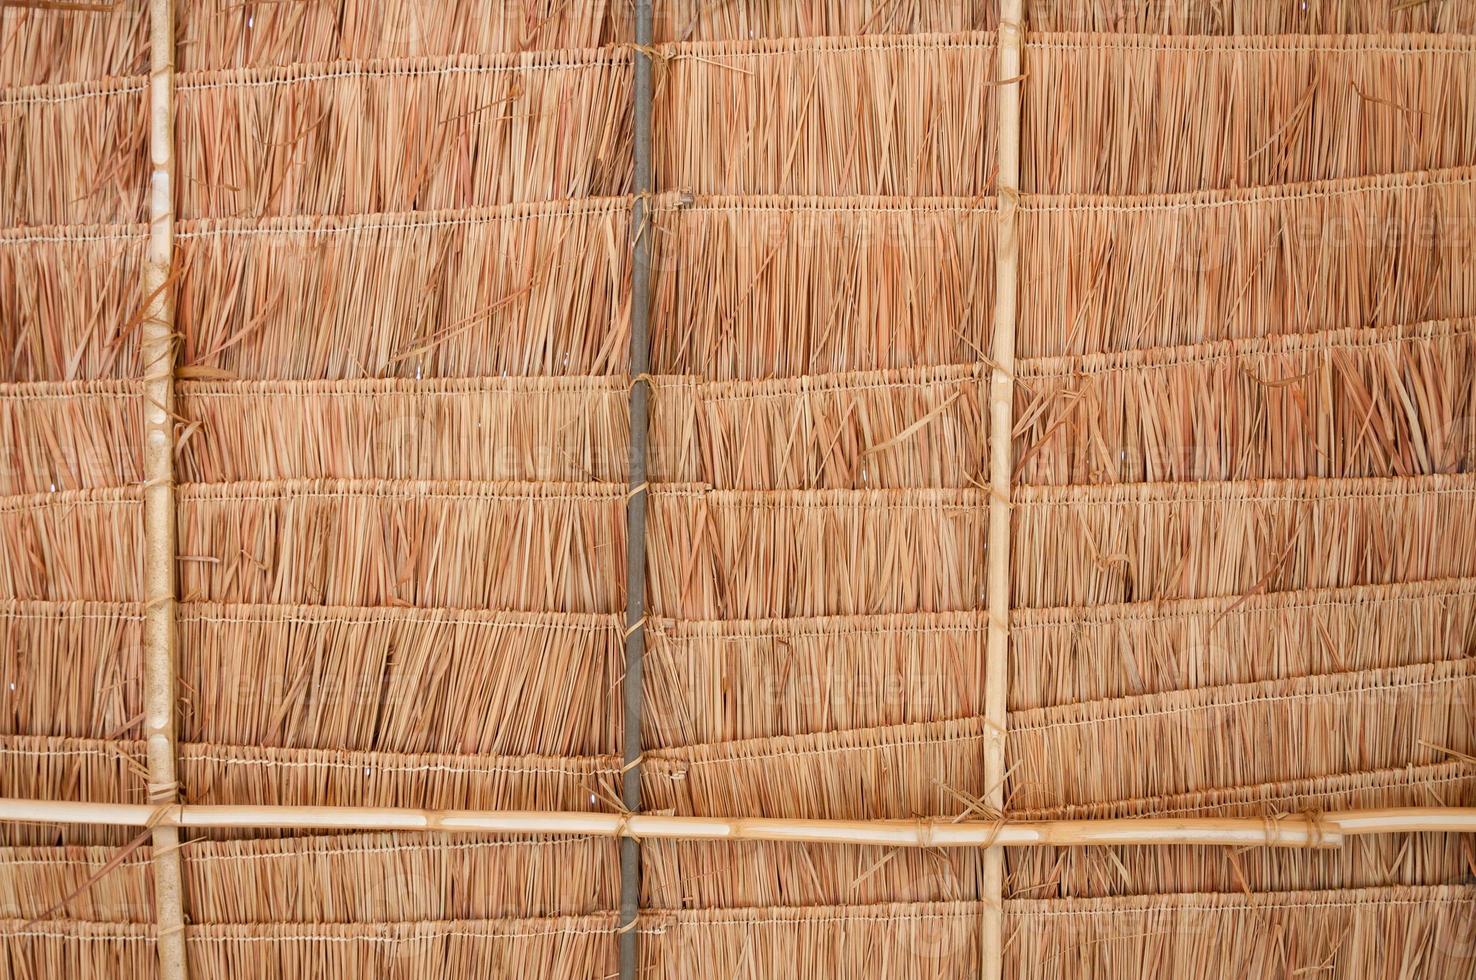 Rural house roof made of cogon grass,thatch roof background,Basketwork,Straw pattern roof background and texture photo